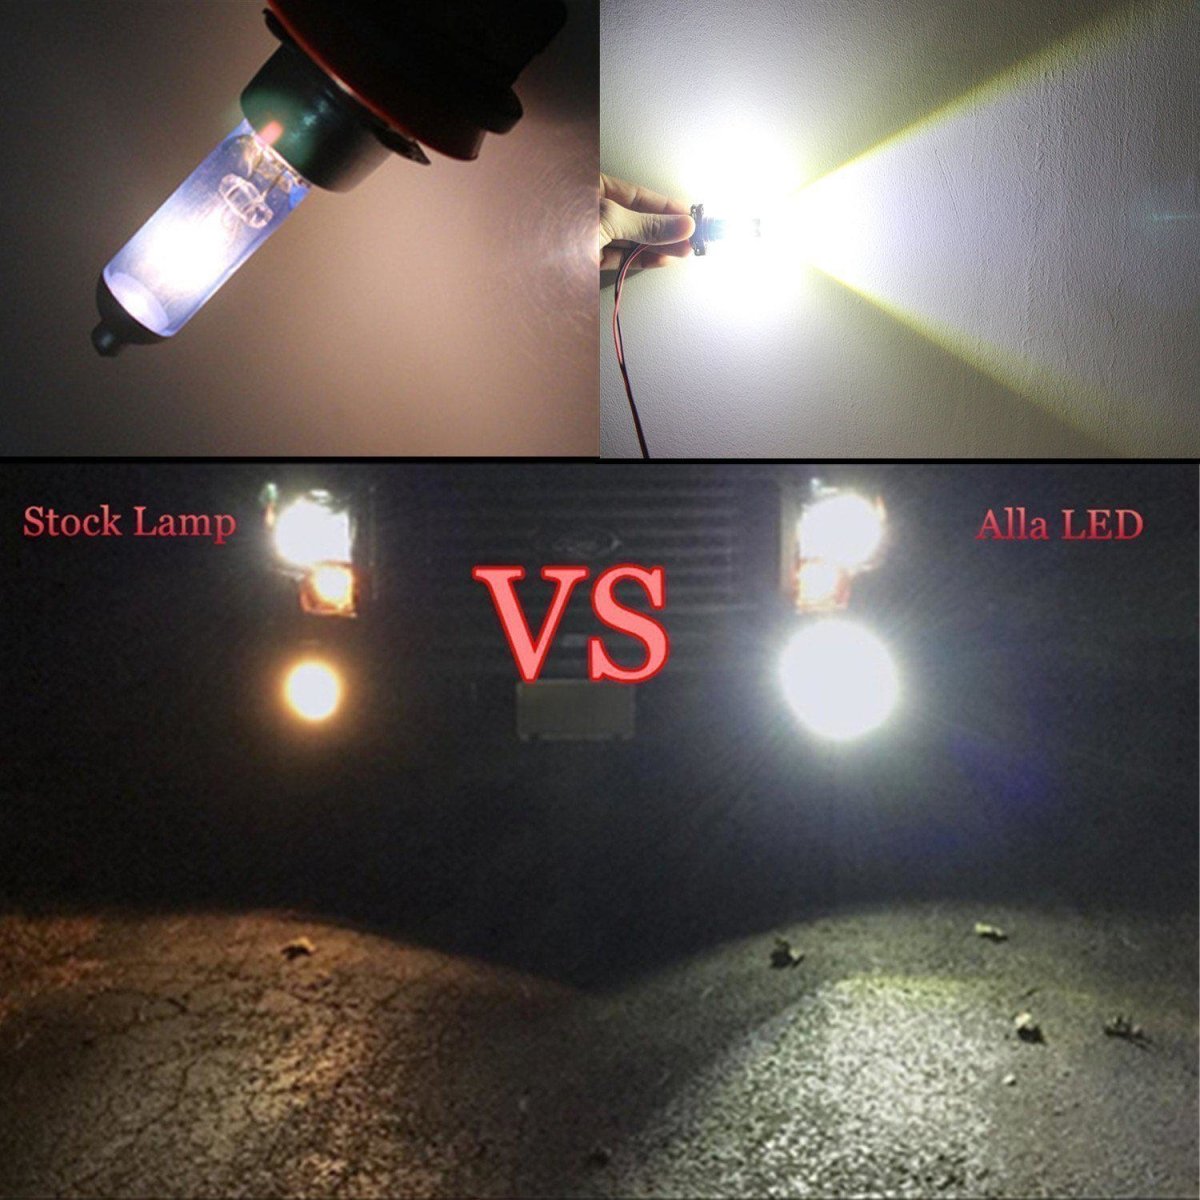 880 899 LED Bulbs 50W Cree Fog Lights Replacement for Cars, Trucks 885 -Alla Lighting